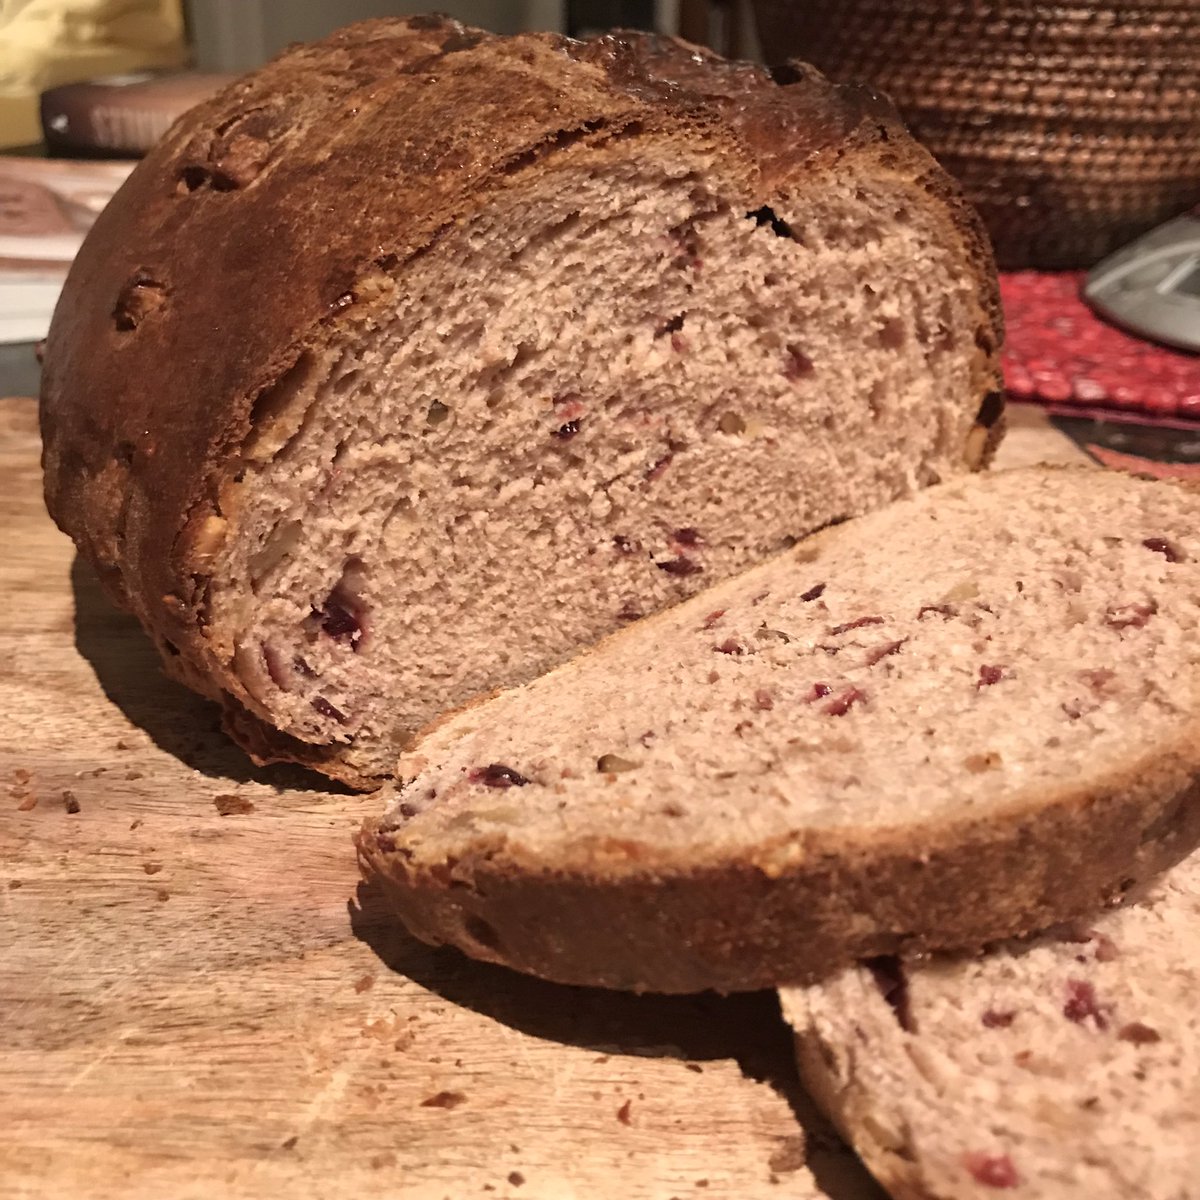 Bread #21: Cranberry-Walnut Bread. I made this bread two weeks ago but I’ve been so busy  a nicely textured sandwich bread, cool with some brie, and a really pretty and hefty crust. Not an all-time fave bread, but a nice one.